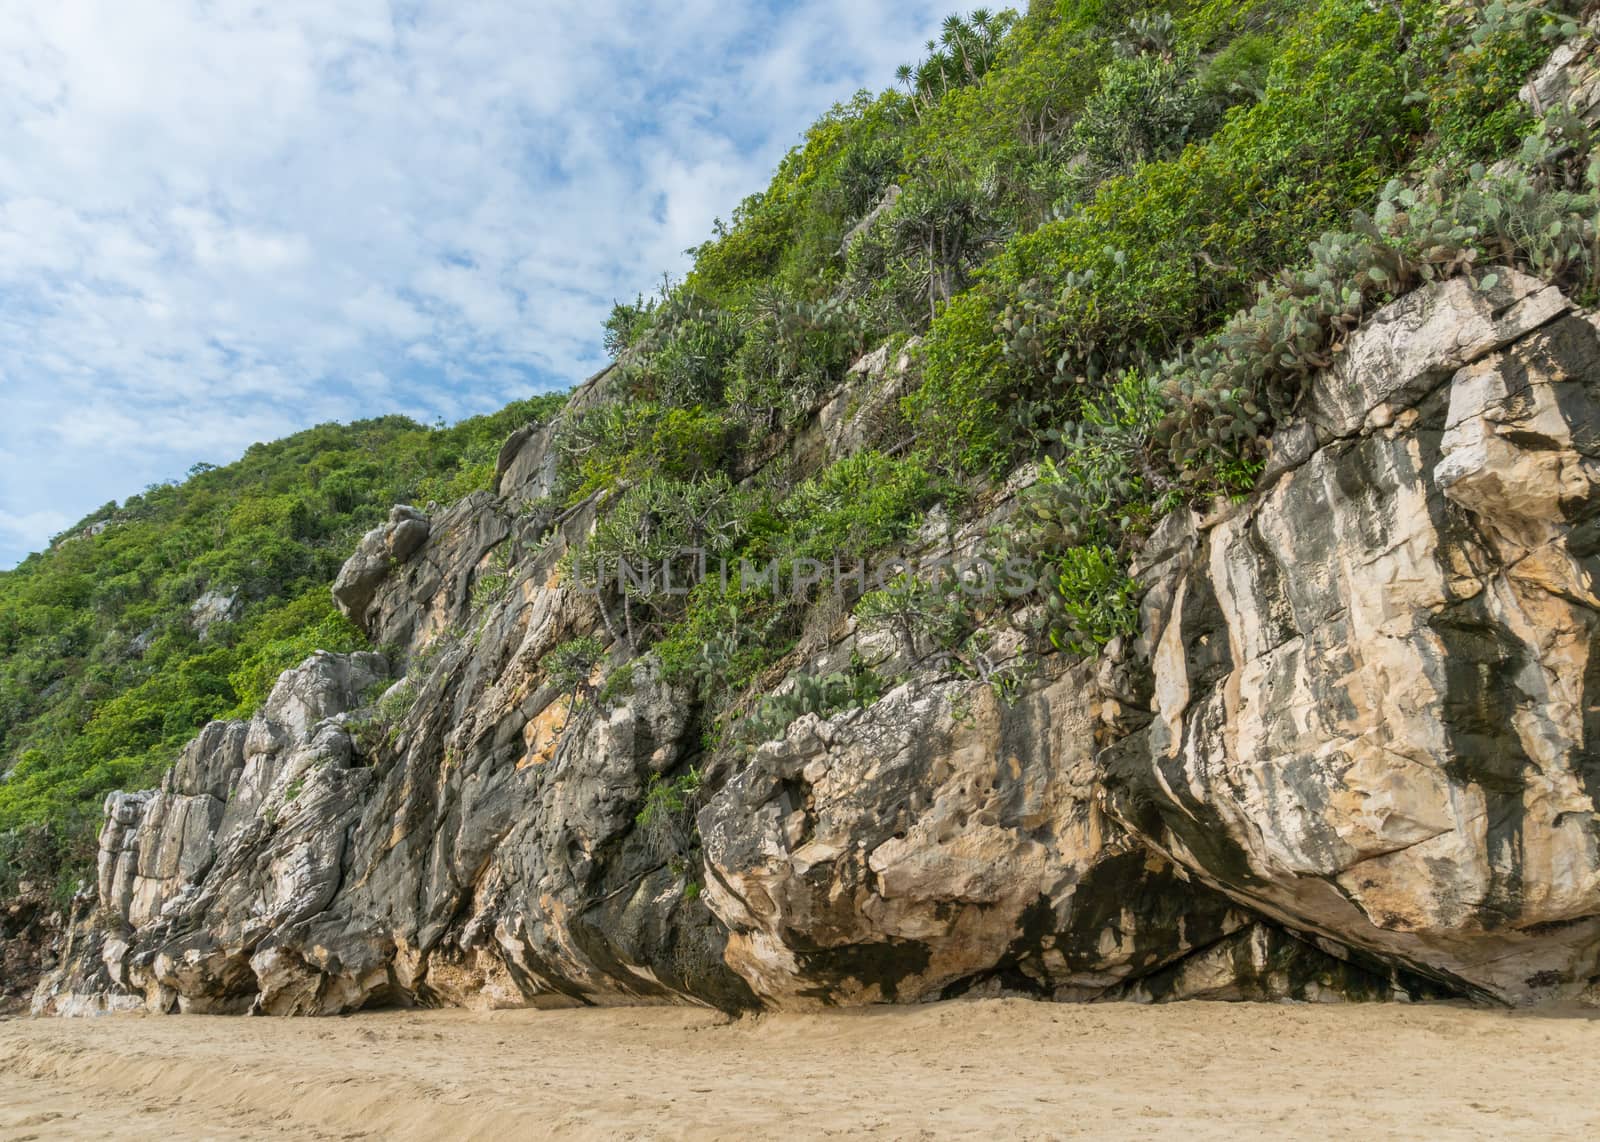 Khao Kalok rock or stone mountain on Khao Kalok beach in Thailand. Natural attractions in Thailand travel. The Khao Kalok rock mountain and green tree background